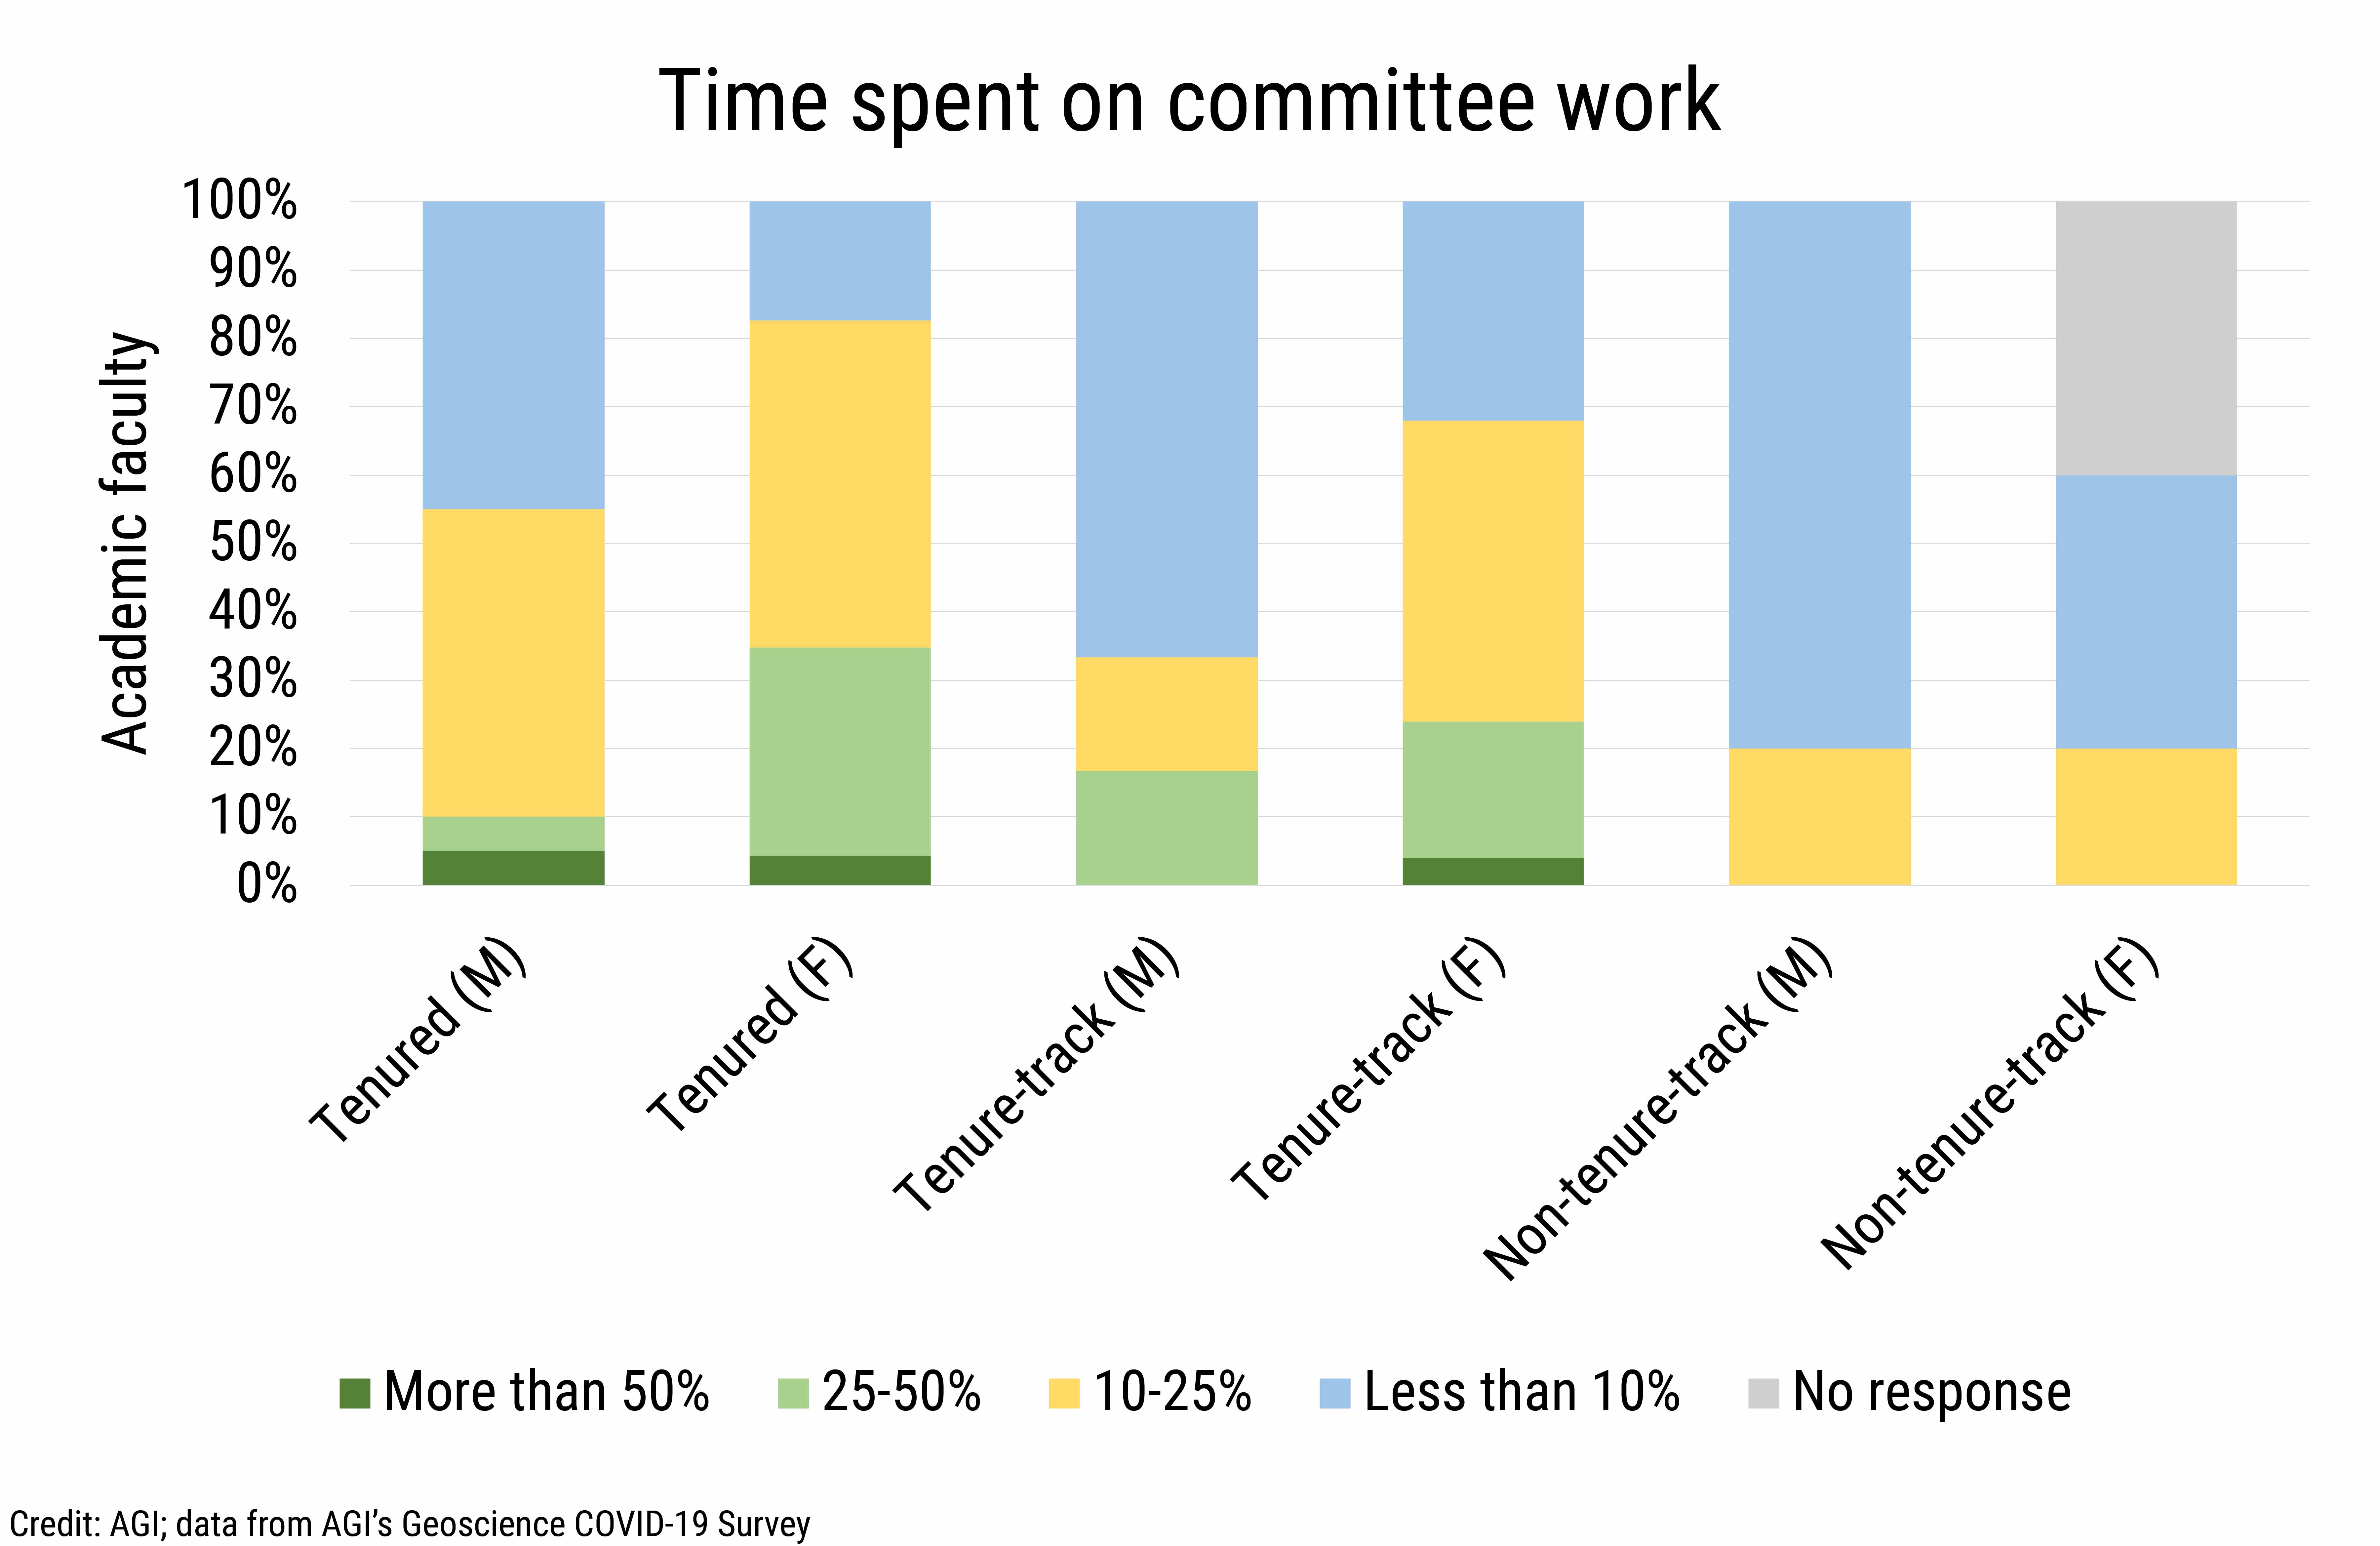 DB_2021-019 chart 01: Time spent on committee work  (Credit: AGI; data from AGI&#039;s Geoscience COVID-19 Survey)